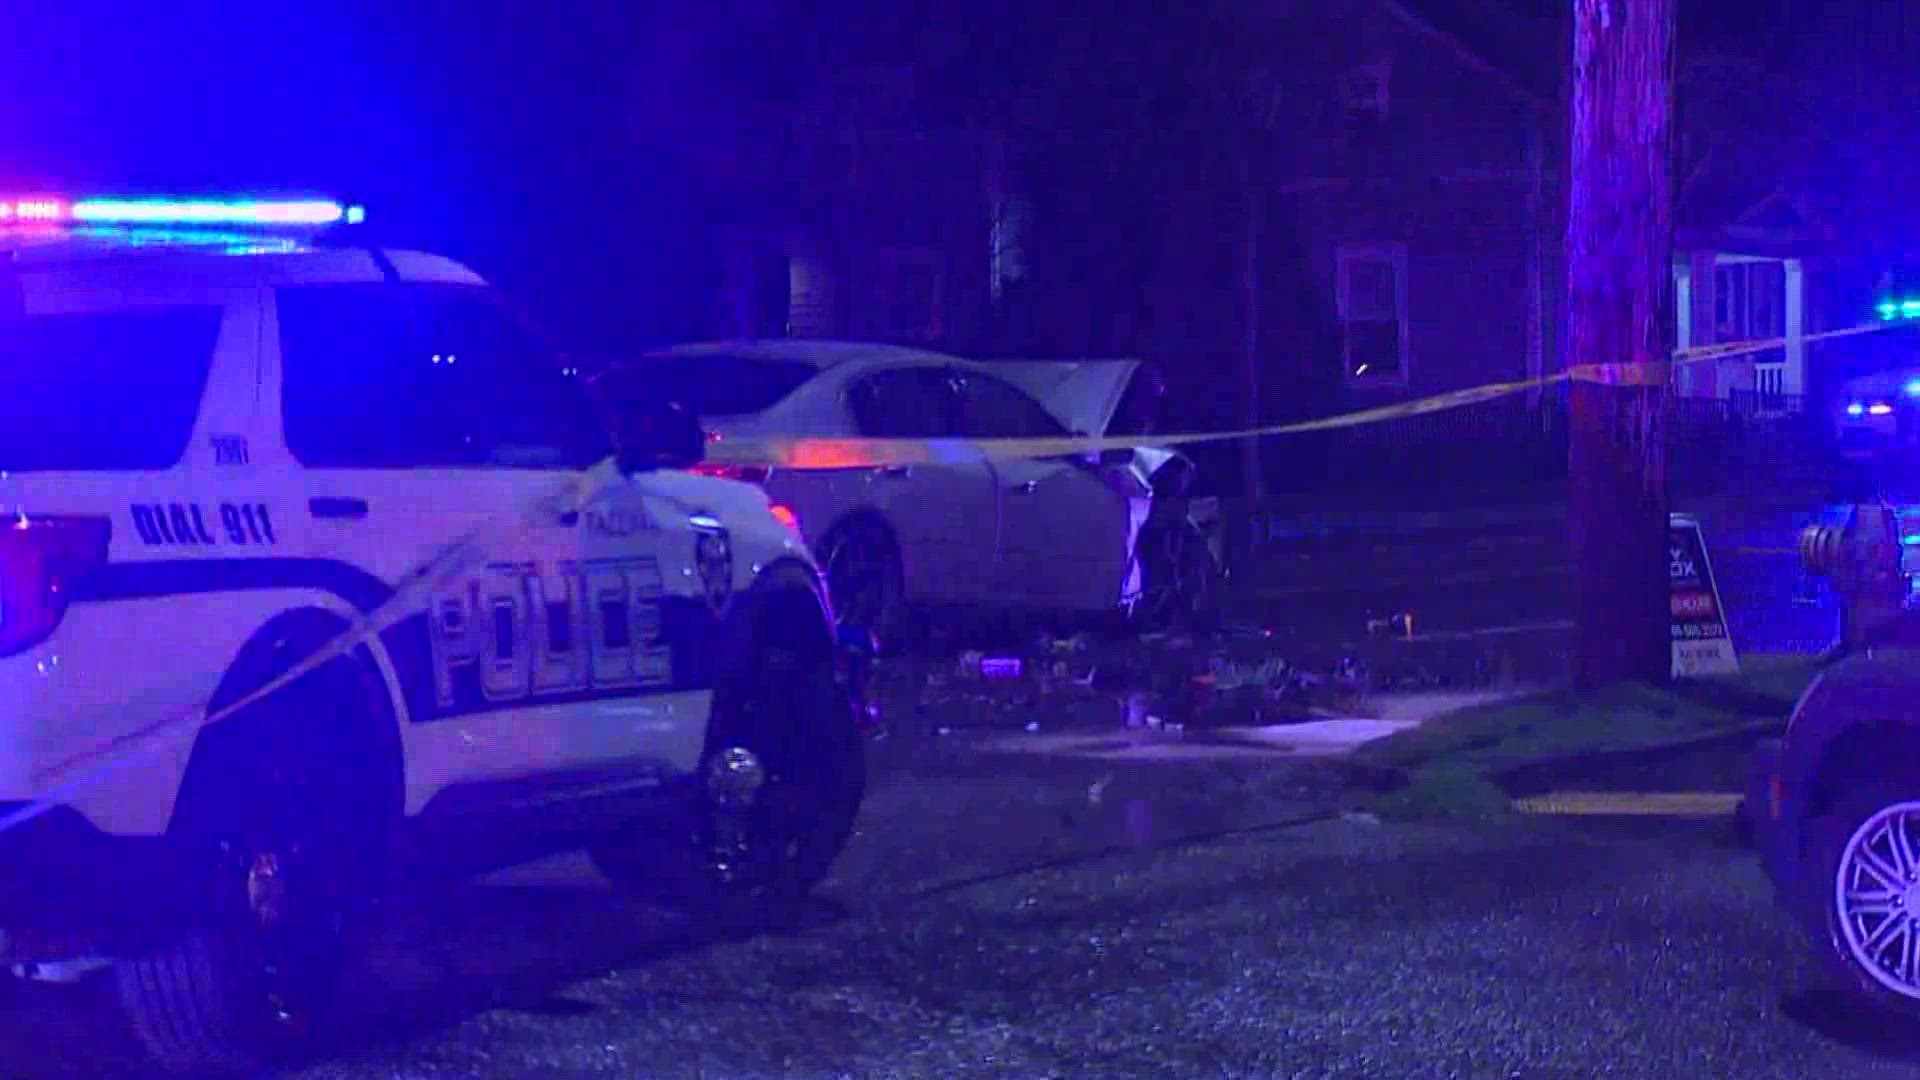 Police are investigating a deadly crash in Tacoma early Monday morning